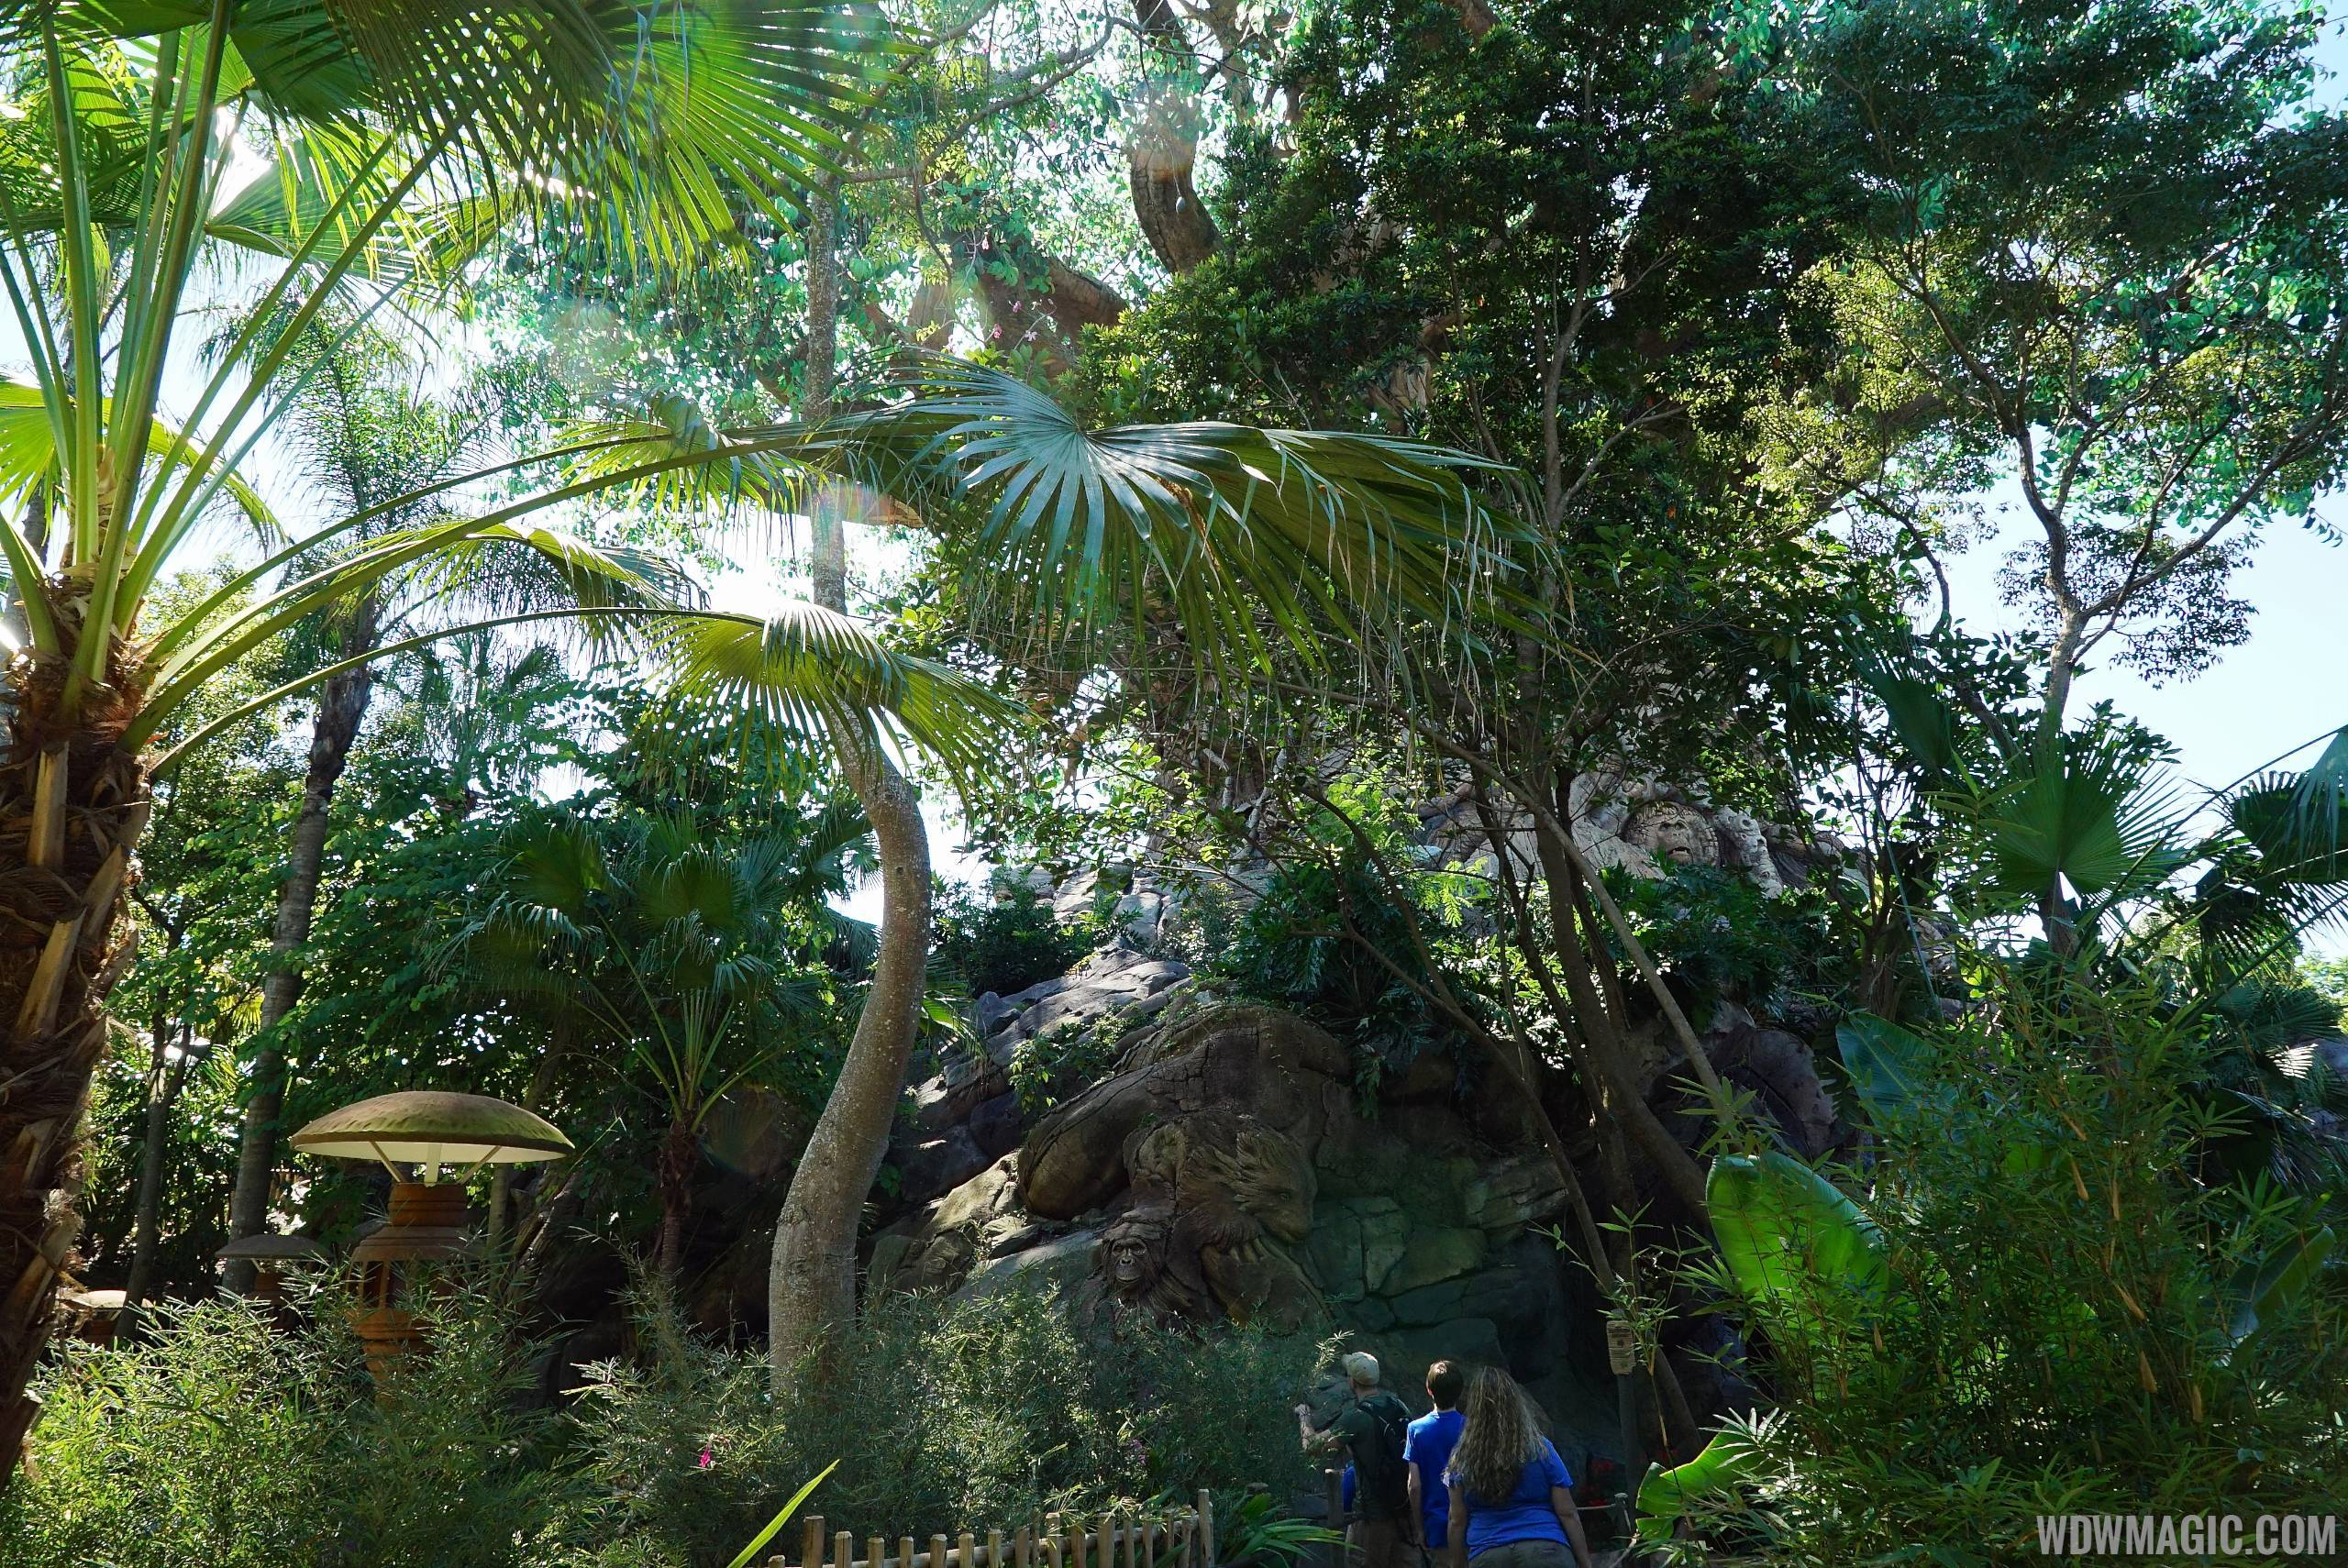 No more overhead nets at Tree of Life